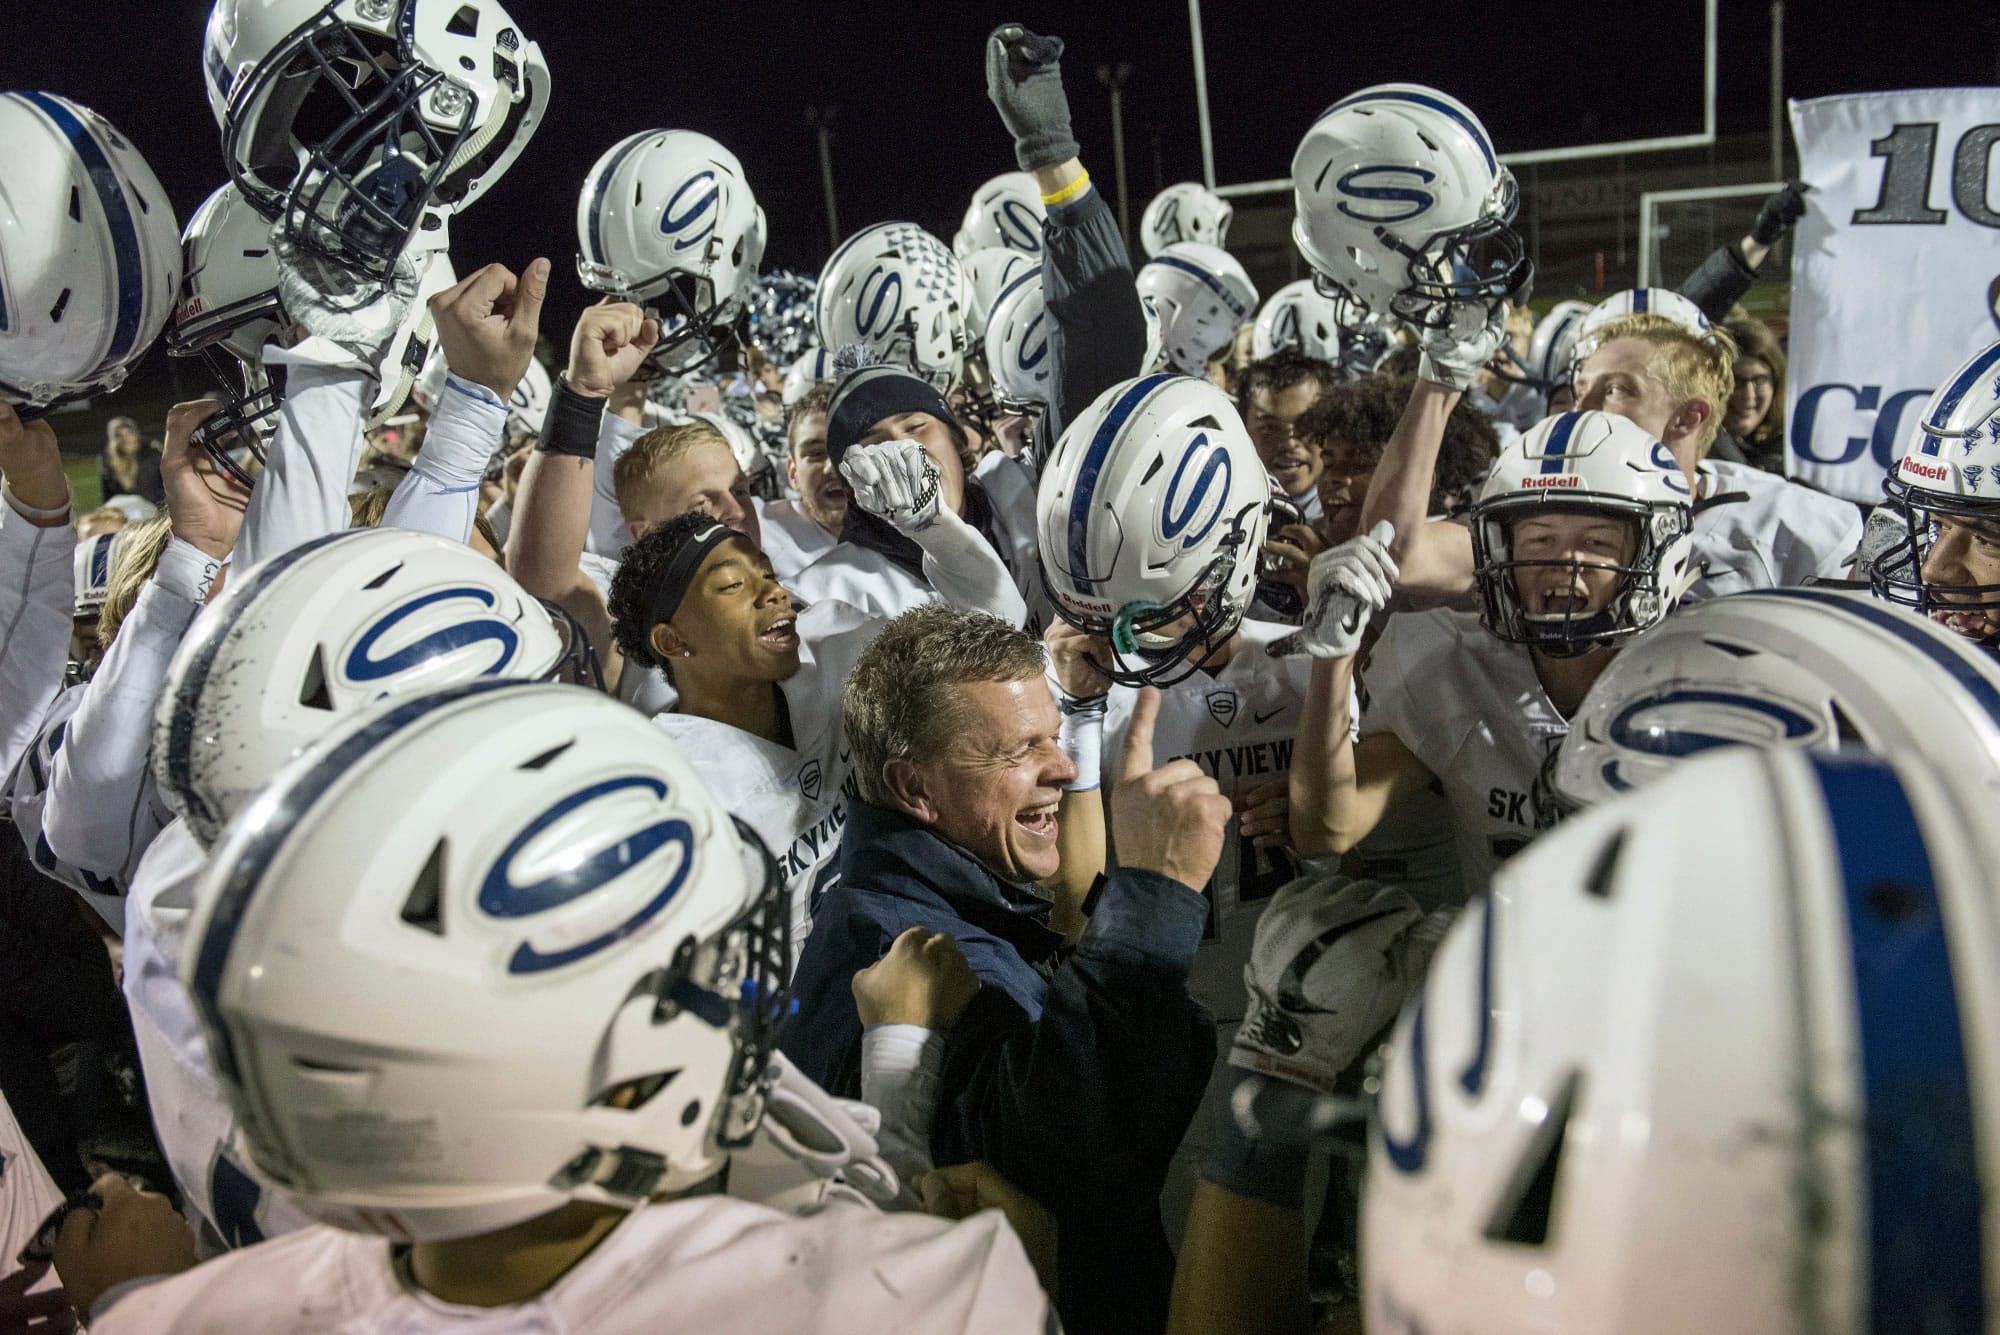 The Skyview football team surrounded coach Steve Kizer to celebrate his 100th win during Thursday night's game at Battle Ground District Stadium on Oct. 12, 2017.